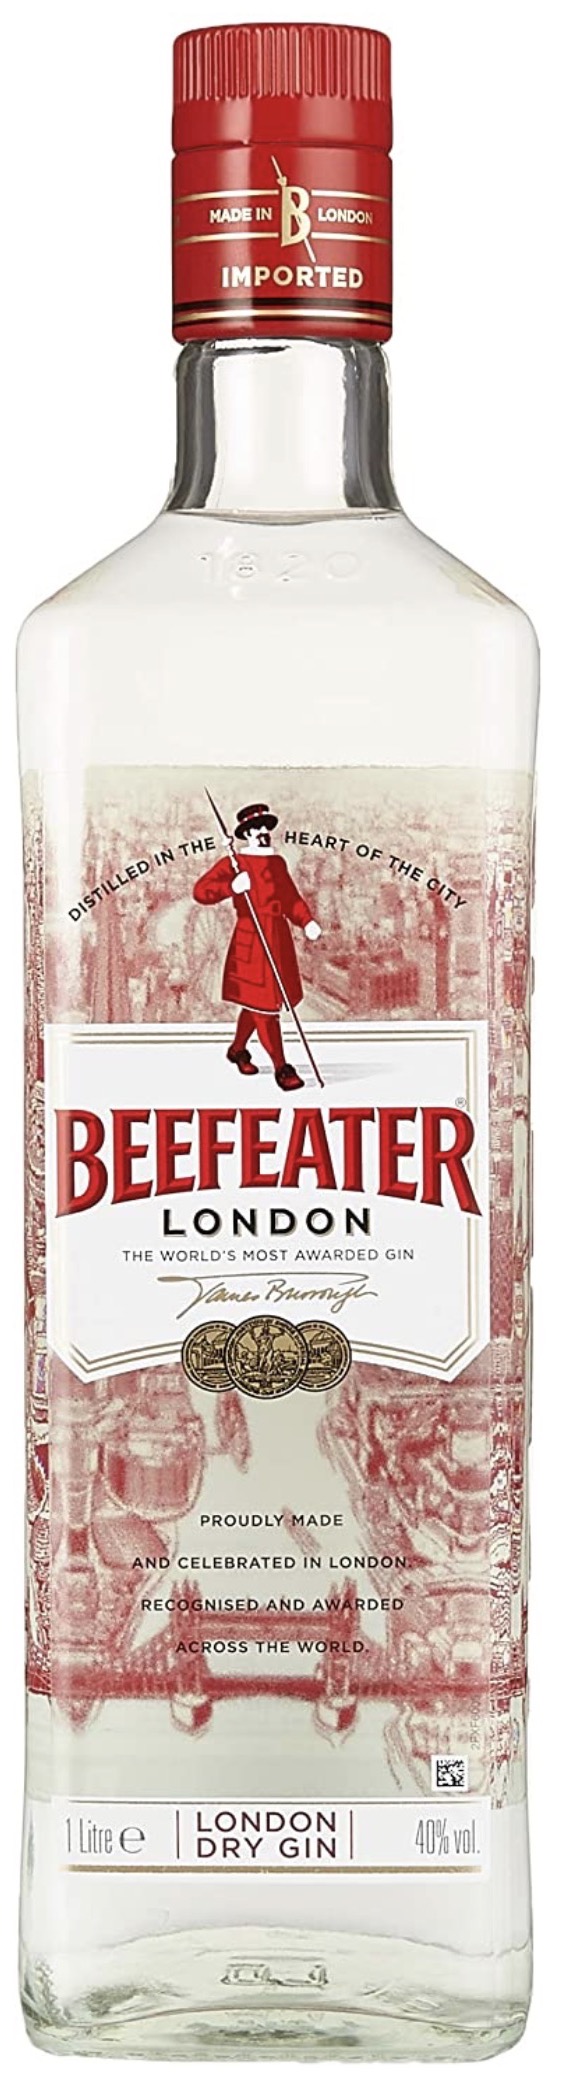 Beefeater London Dry Gin 40% vol. 0,7L